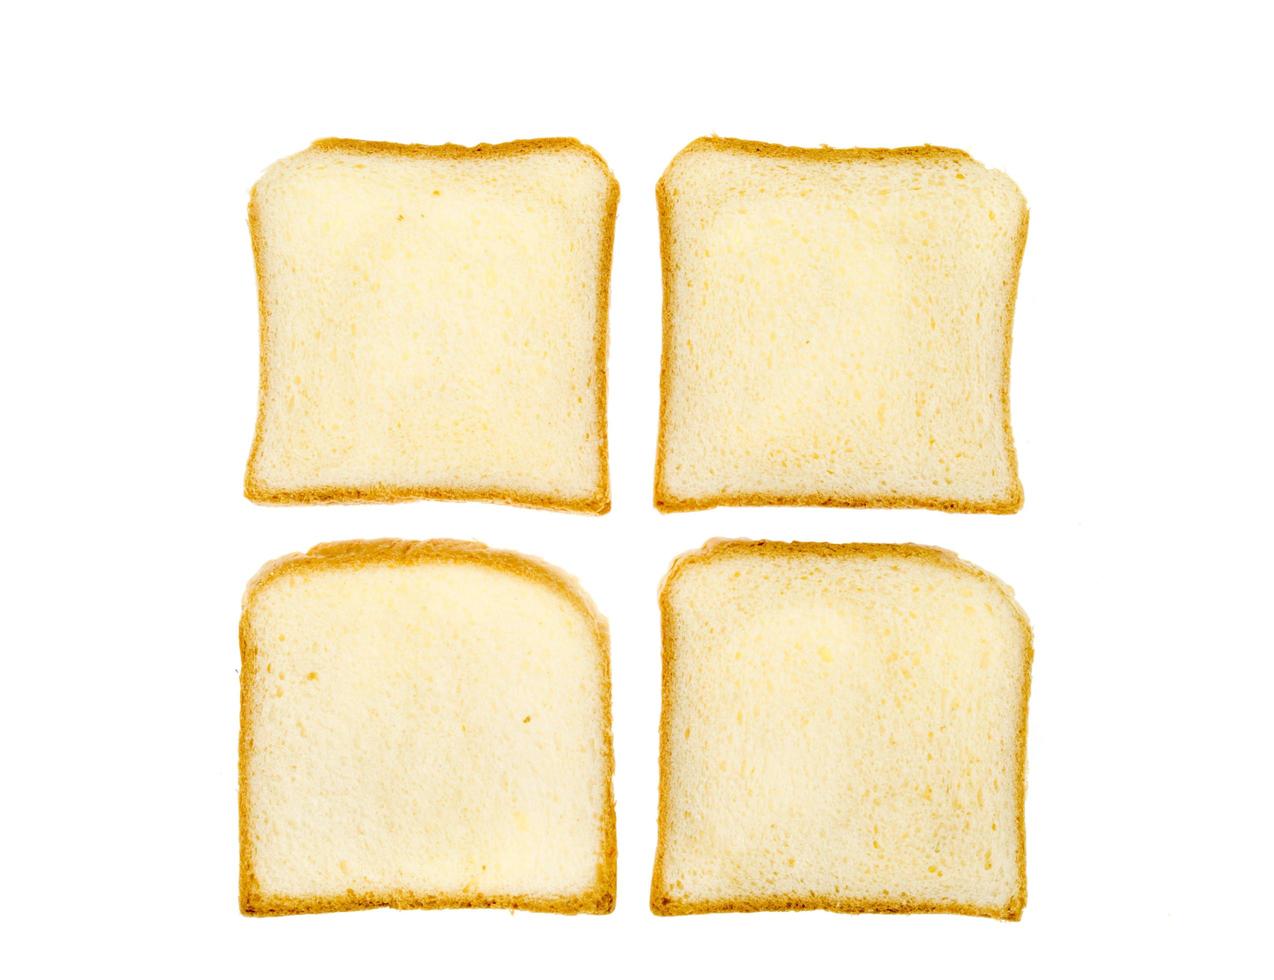 Pieces of square toast wheat bread isolated on white background. photo